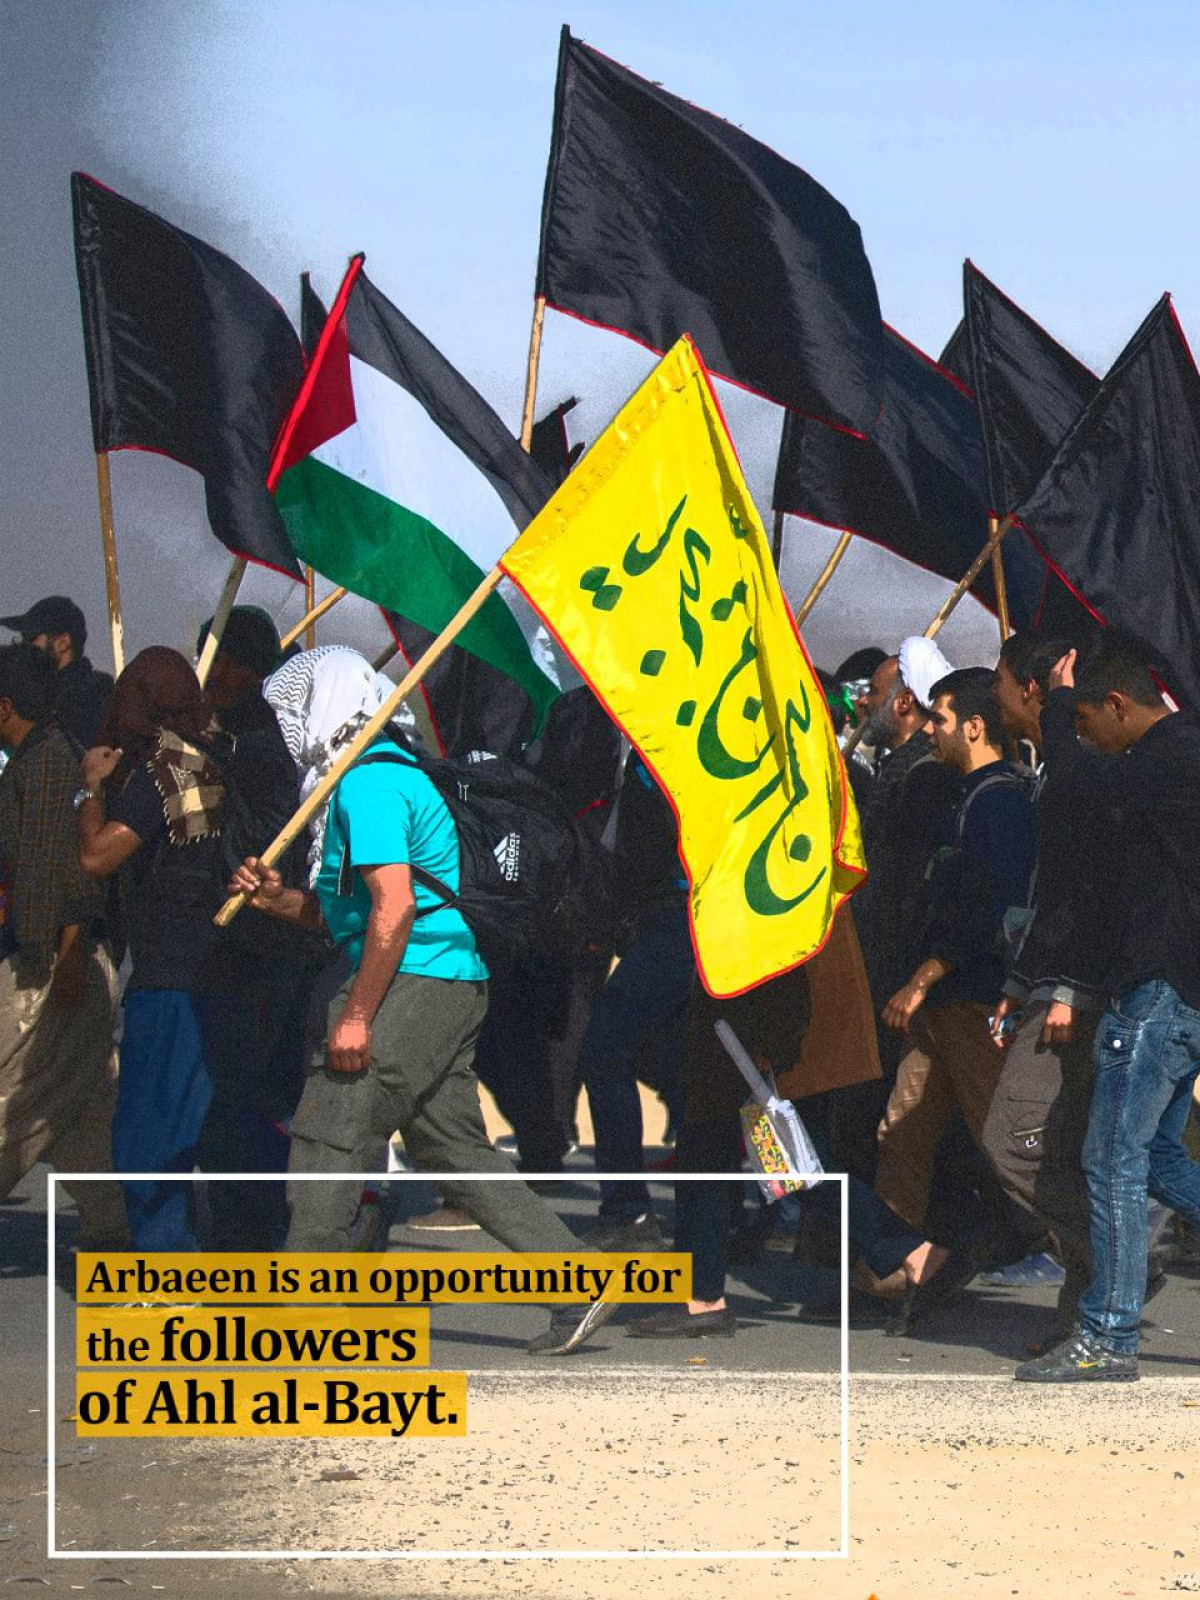 Arbaeen is an opportunity for the followers of Ahl al-Bayt